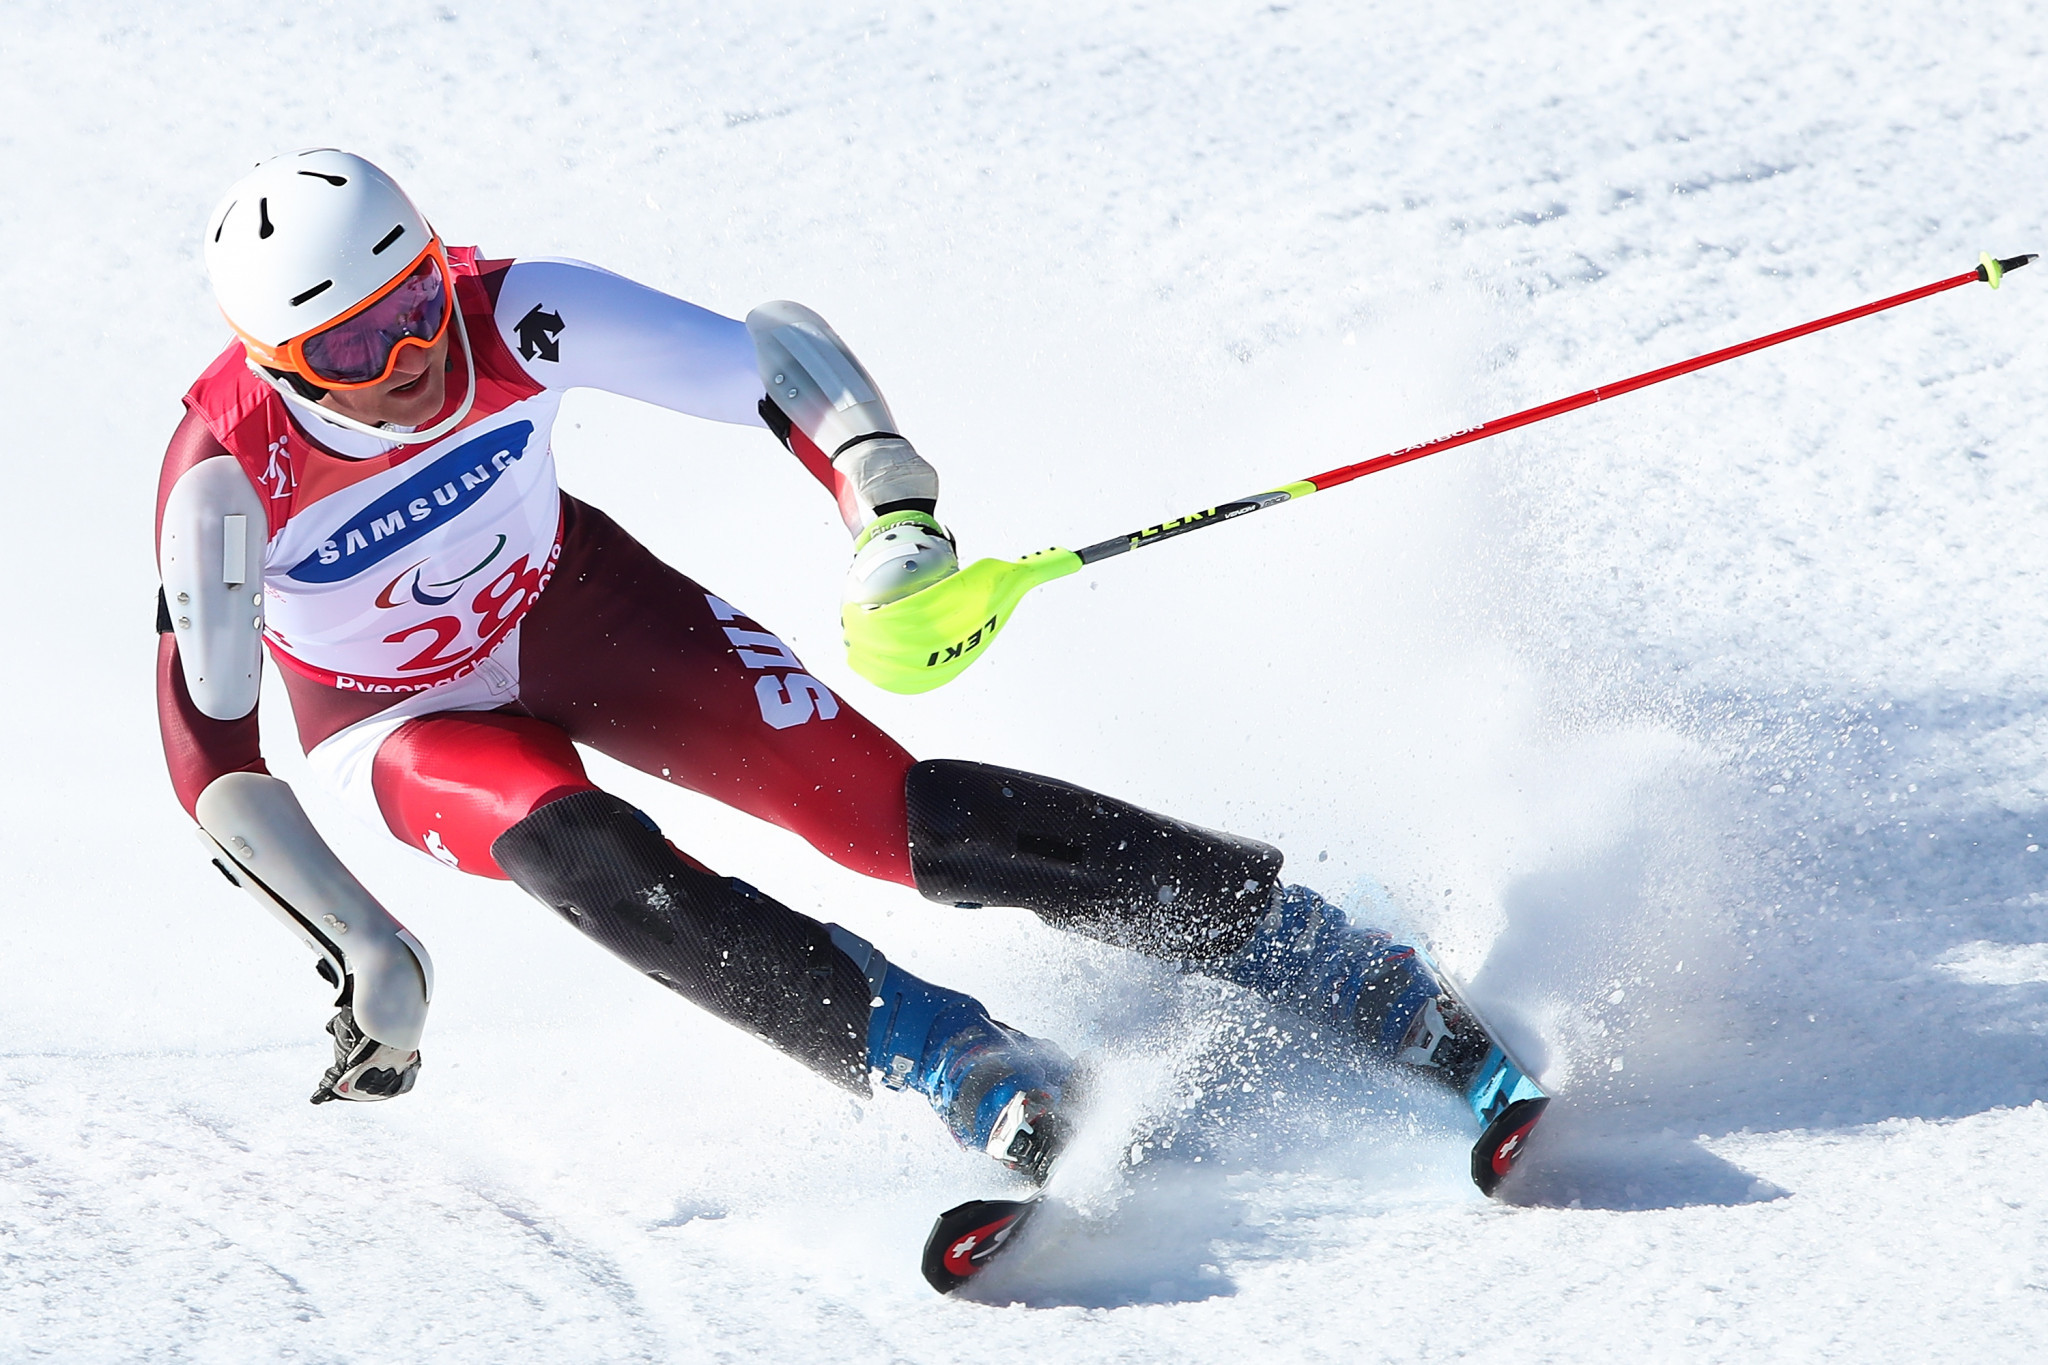 Thomas Pfyl came out on top in today's men's standing competition ©Getty Images